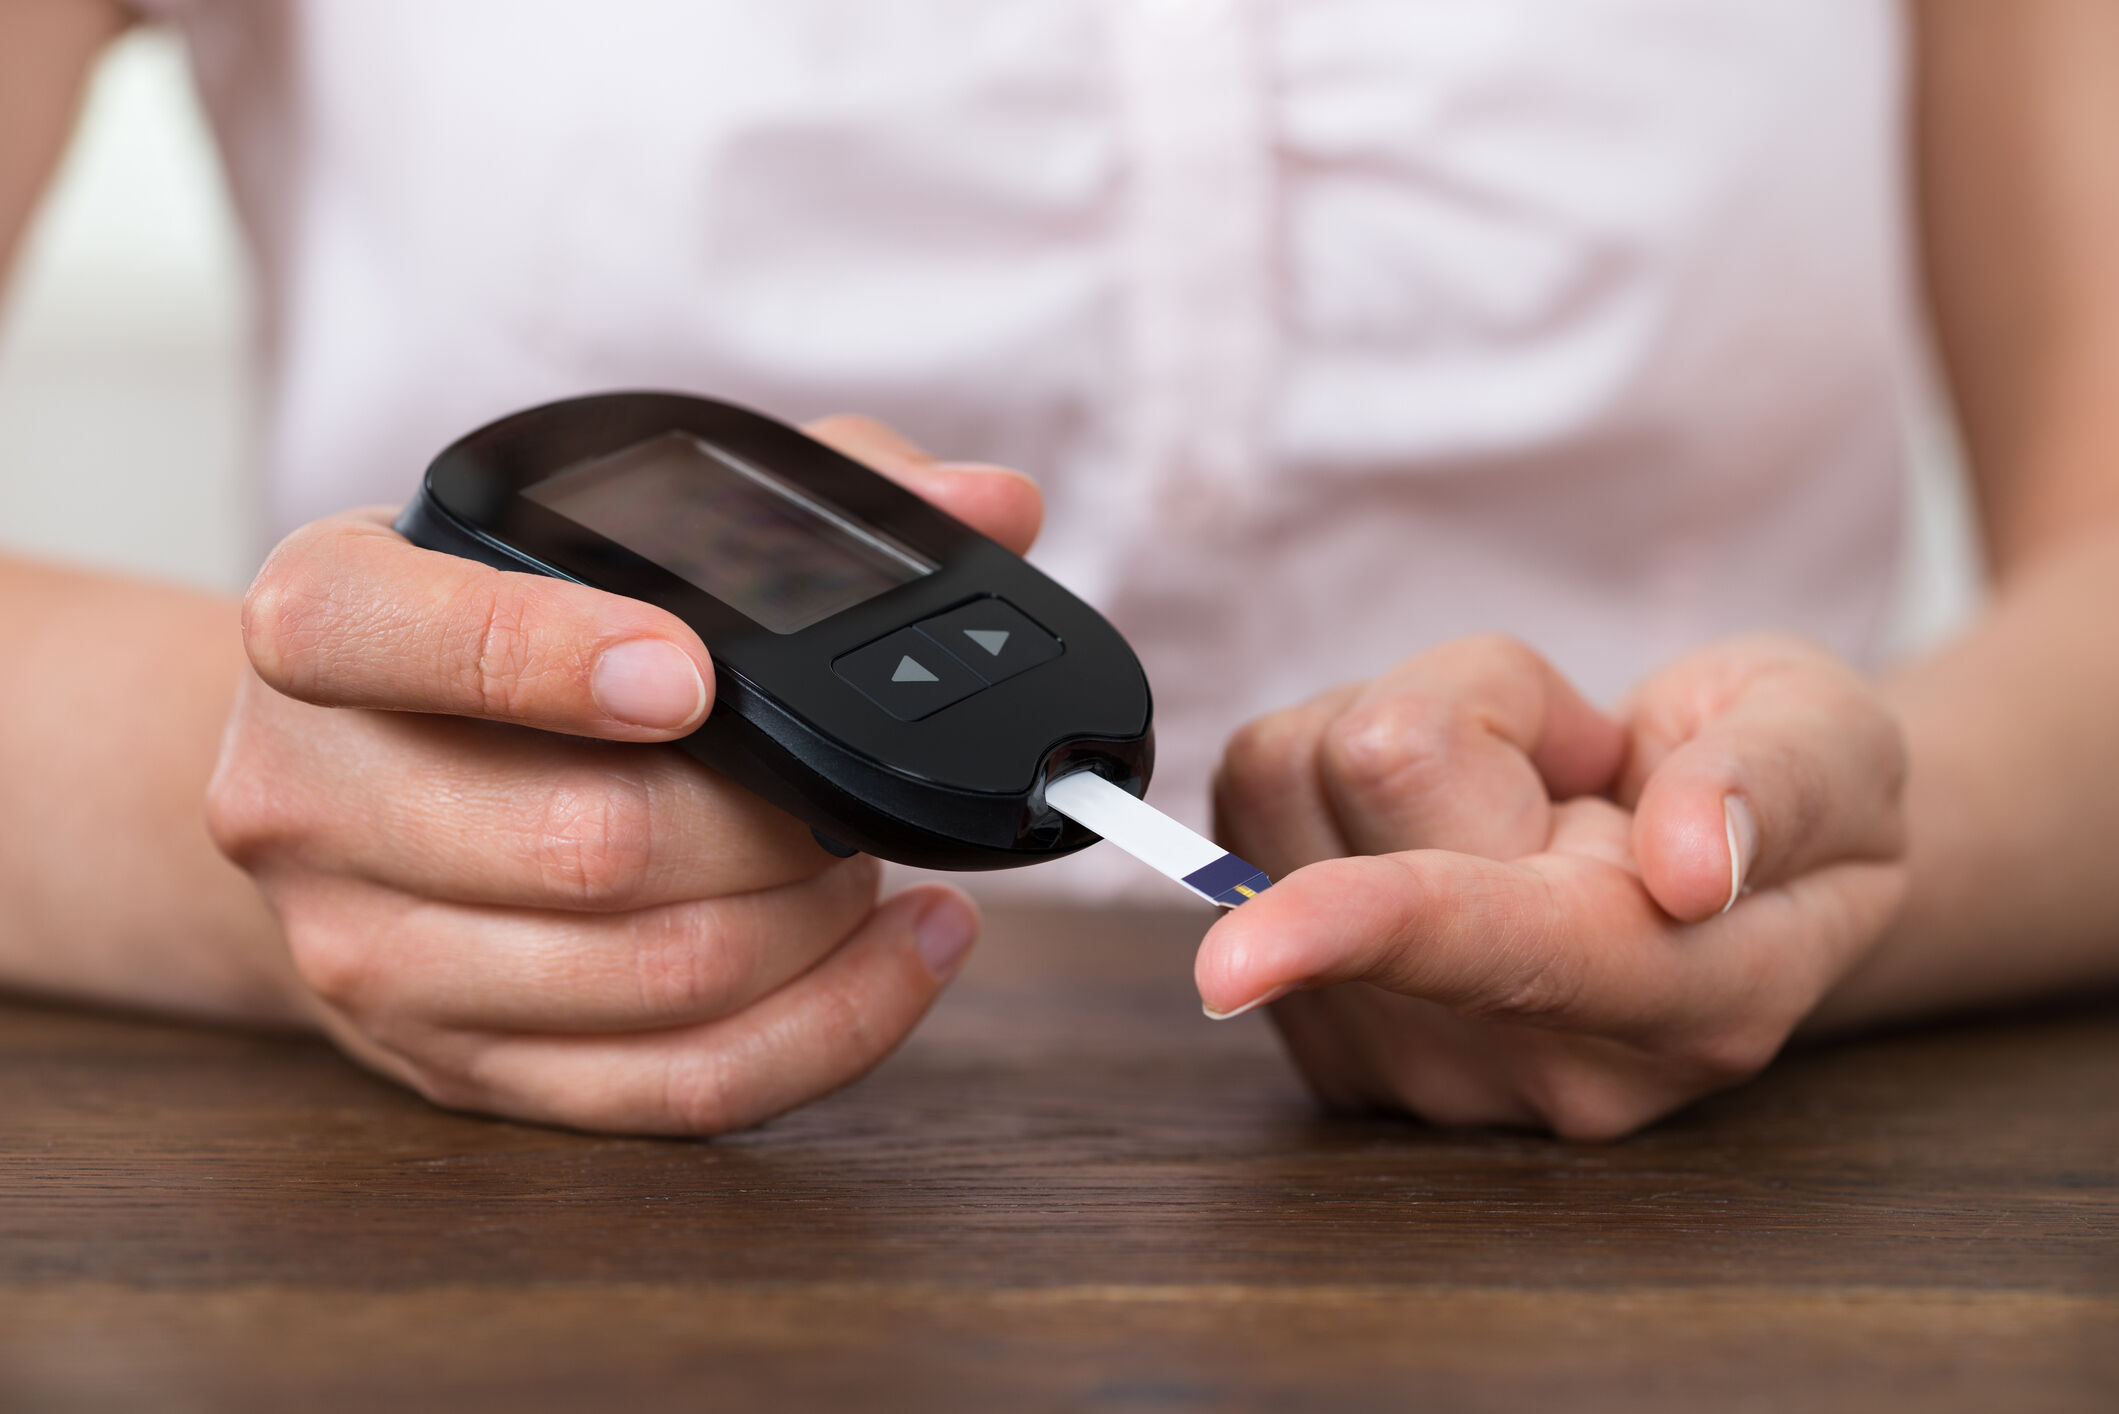 Maryland Health Department offers virtual diabetes education series